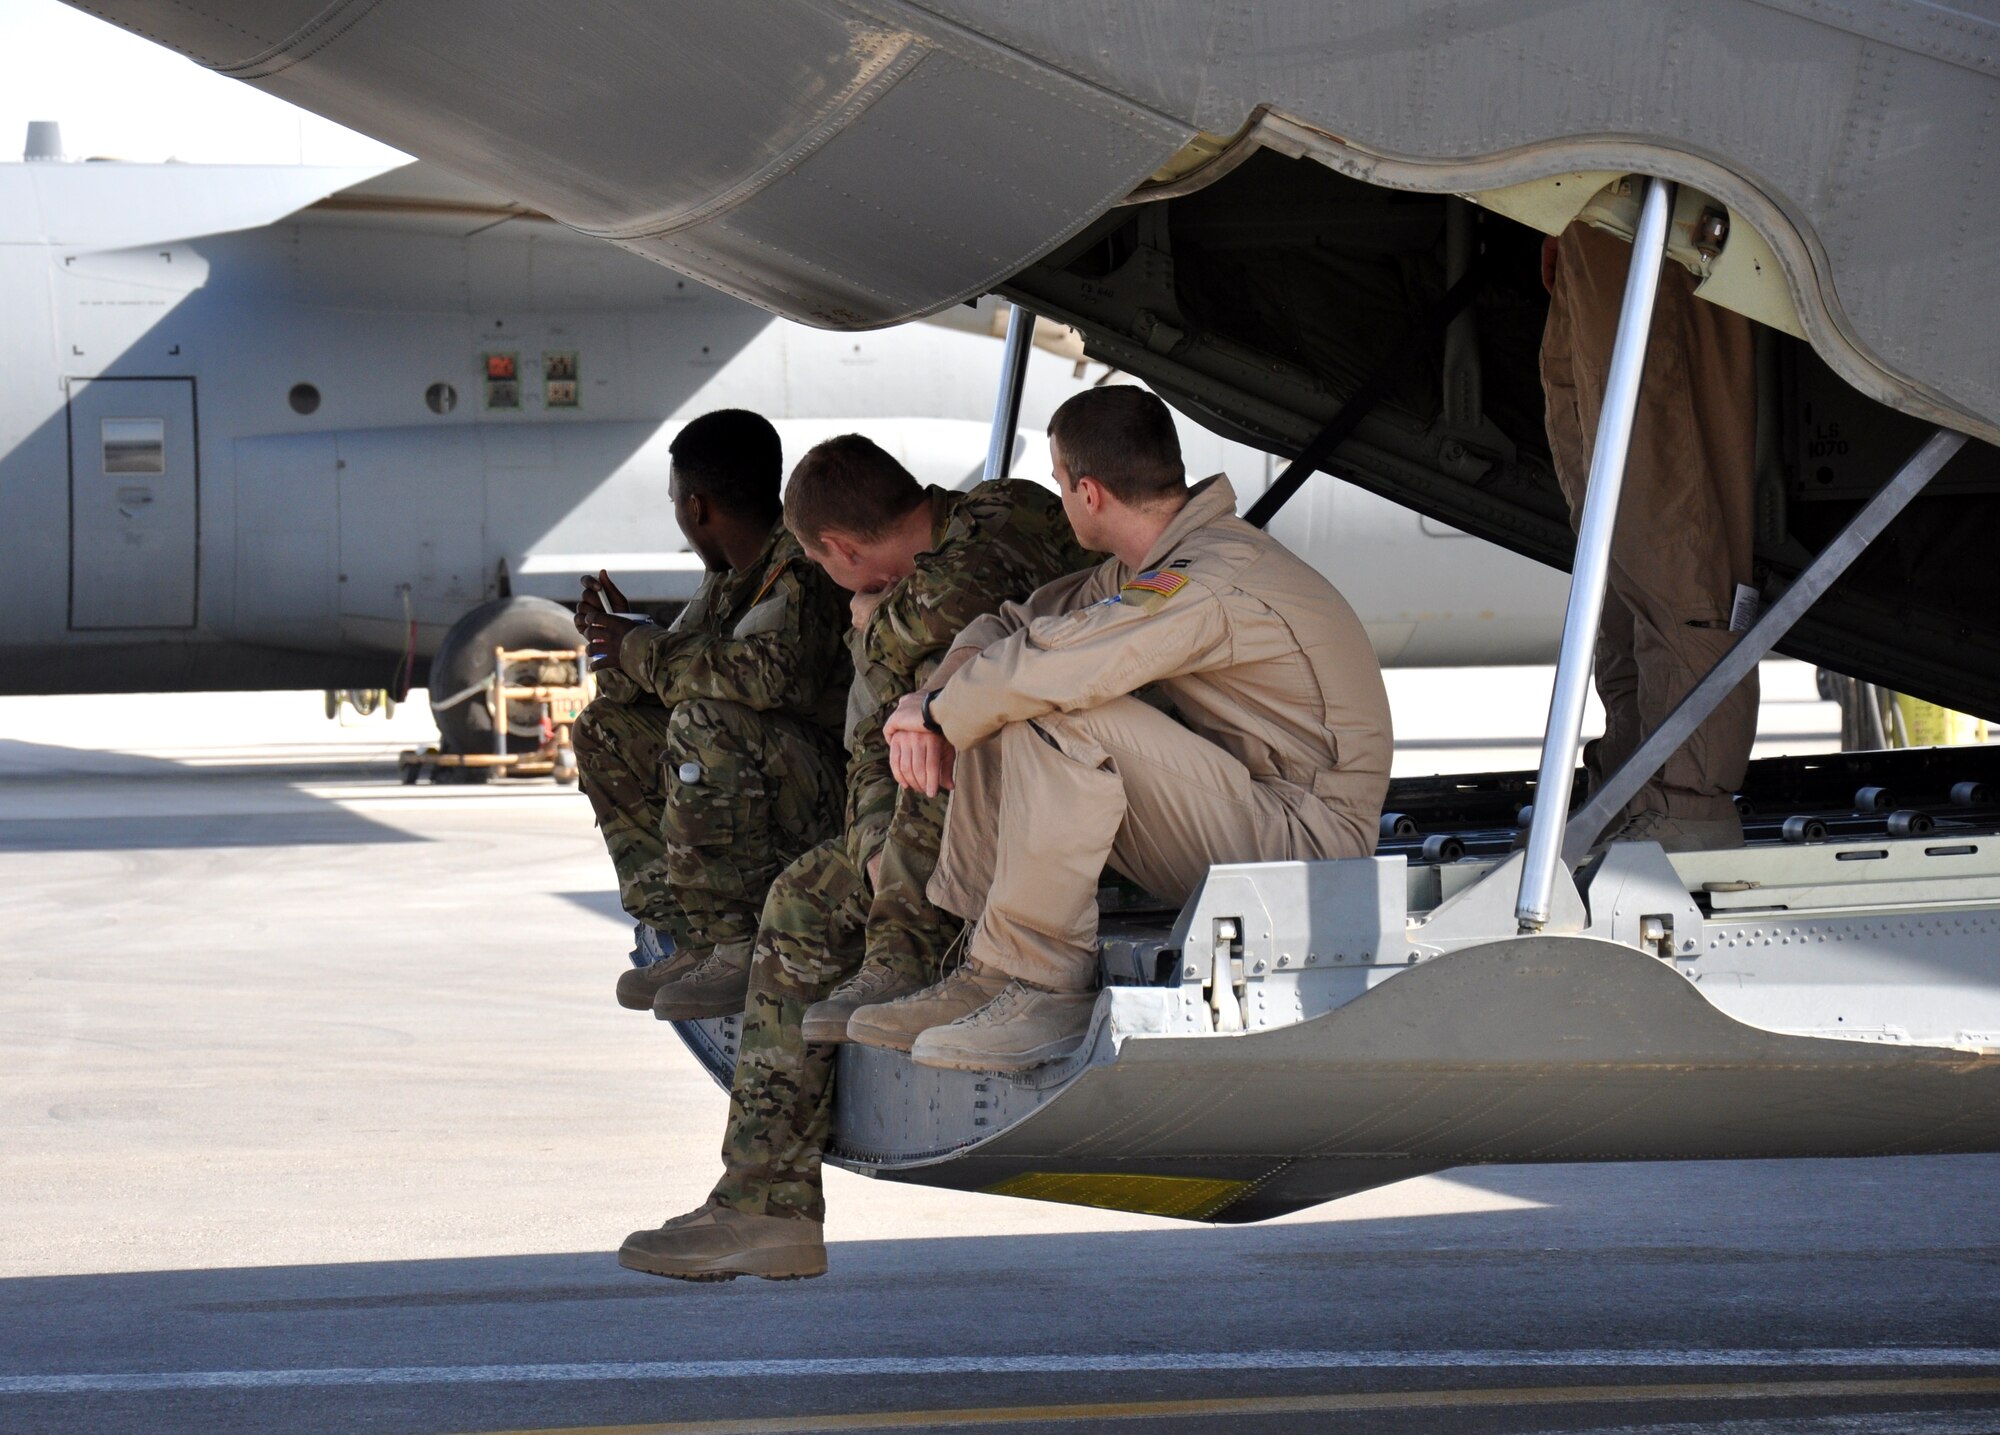 Senior Airmen Dan Simonsen and Marcus Wright, loadmasters, and Capt. Russell Neice, C-130J pilot, sit on the back of the aircraft parked on the ramp at Kandahar Airfield in between missions Nov. 15. They are assigned to the 772nd Expeditionary Airlift Squadron and are deployed from Dyess Air Force Base, Texas. (U.S. Air Force photo/Capt. Tristan Hinderliter) 